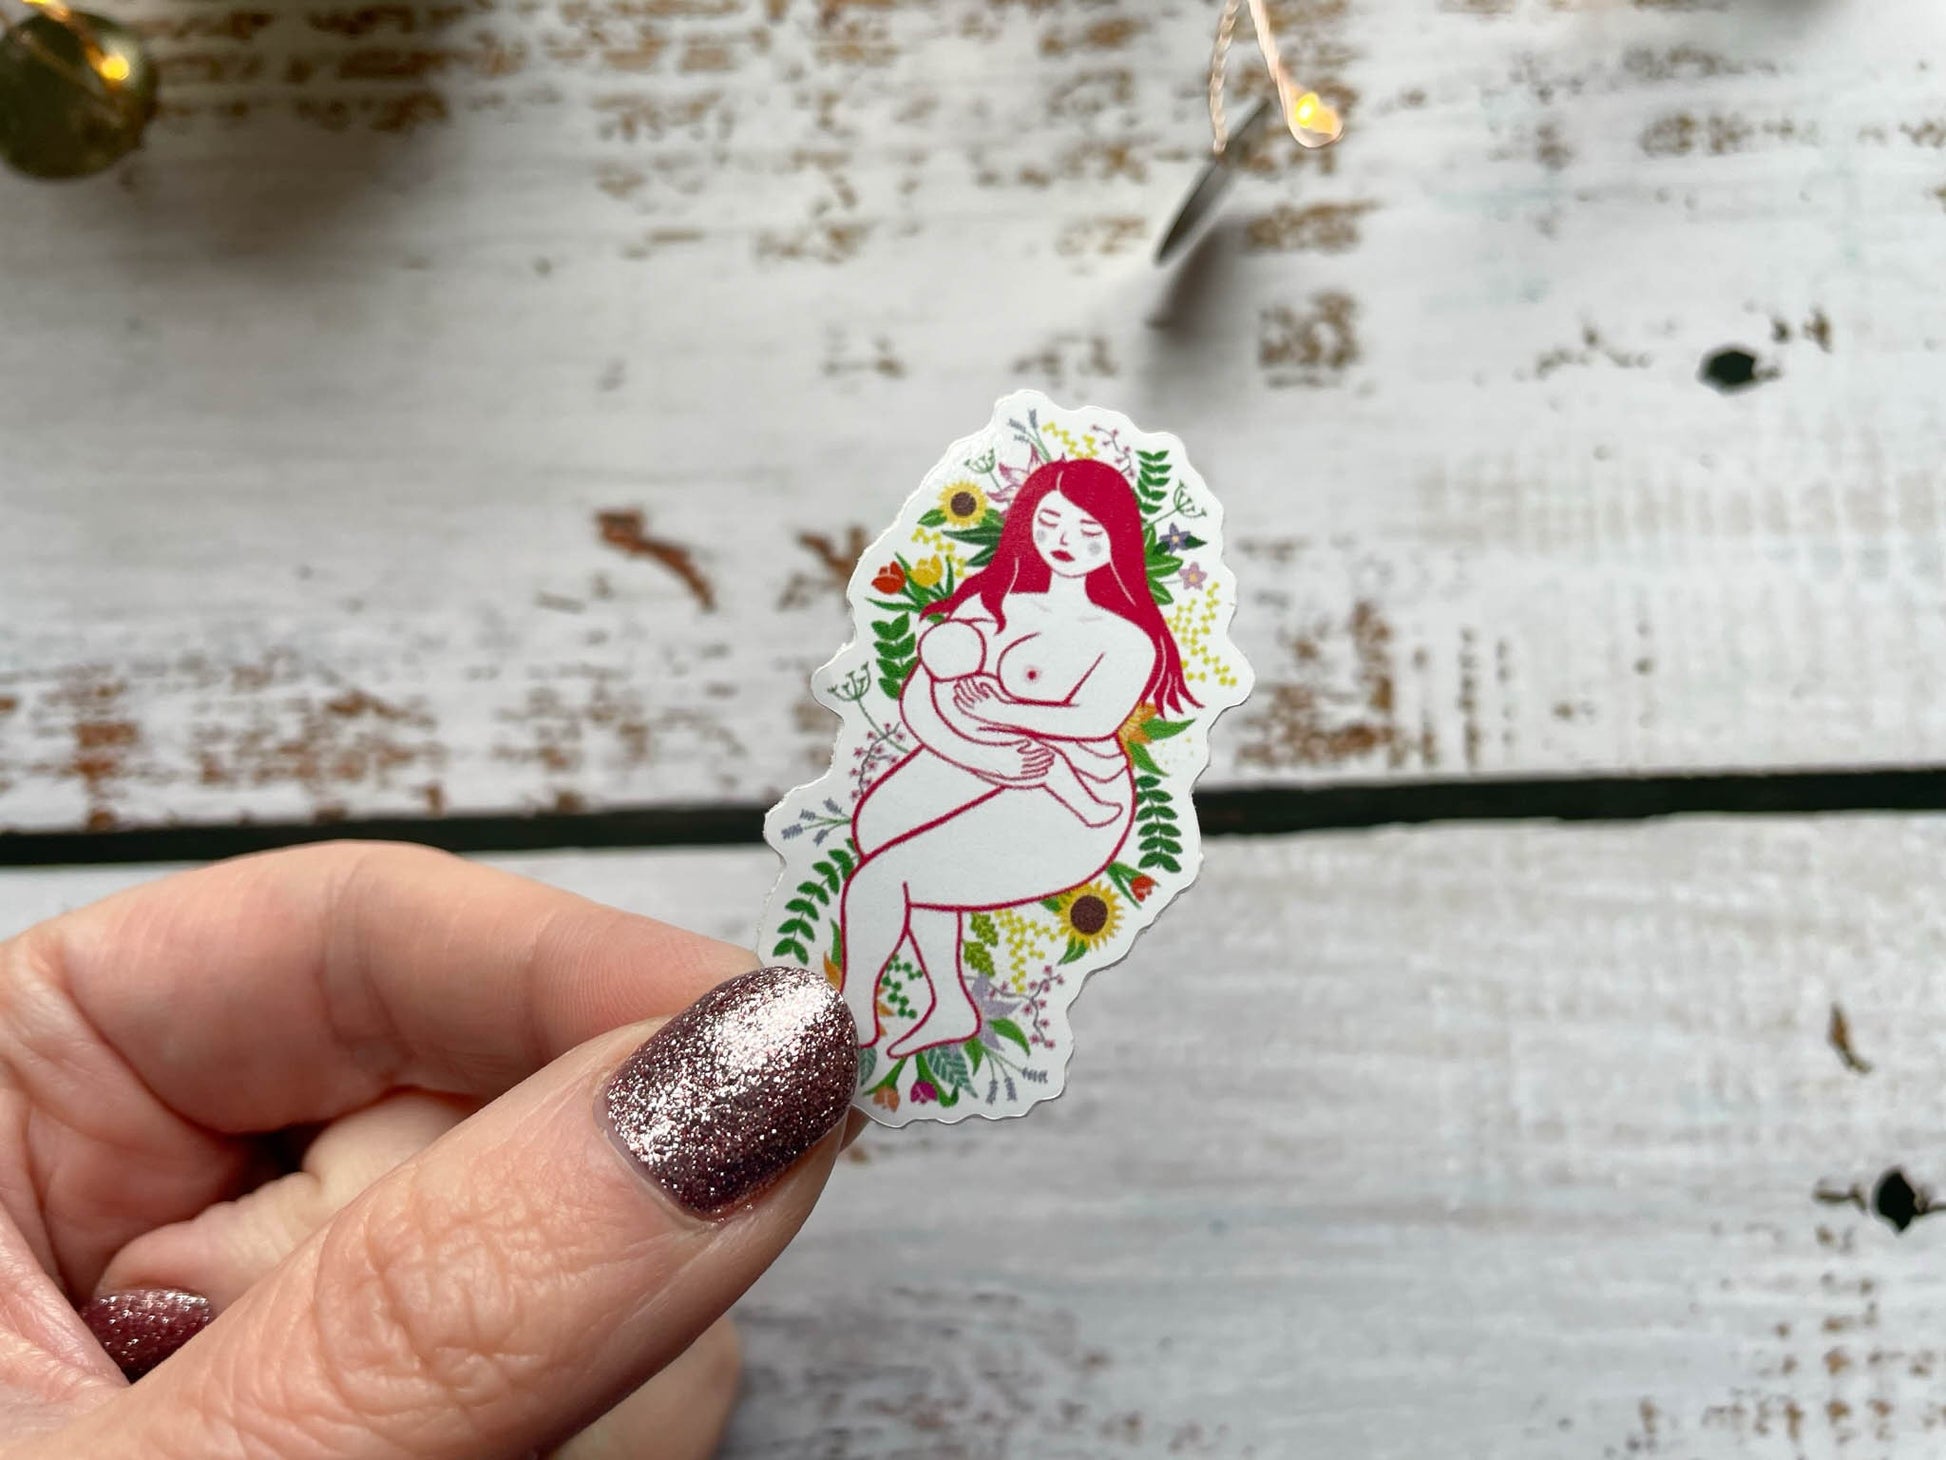 A 5cm sticker of a breastfeeding mother laying on a bed of flowers and leaves